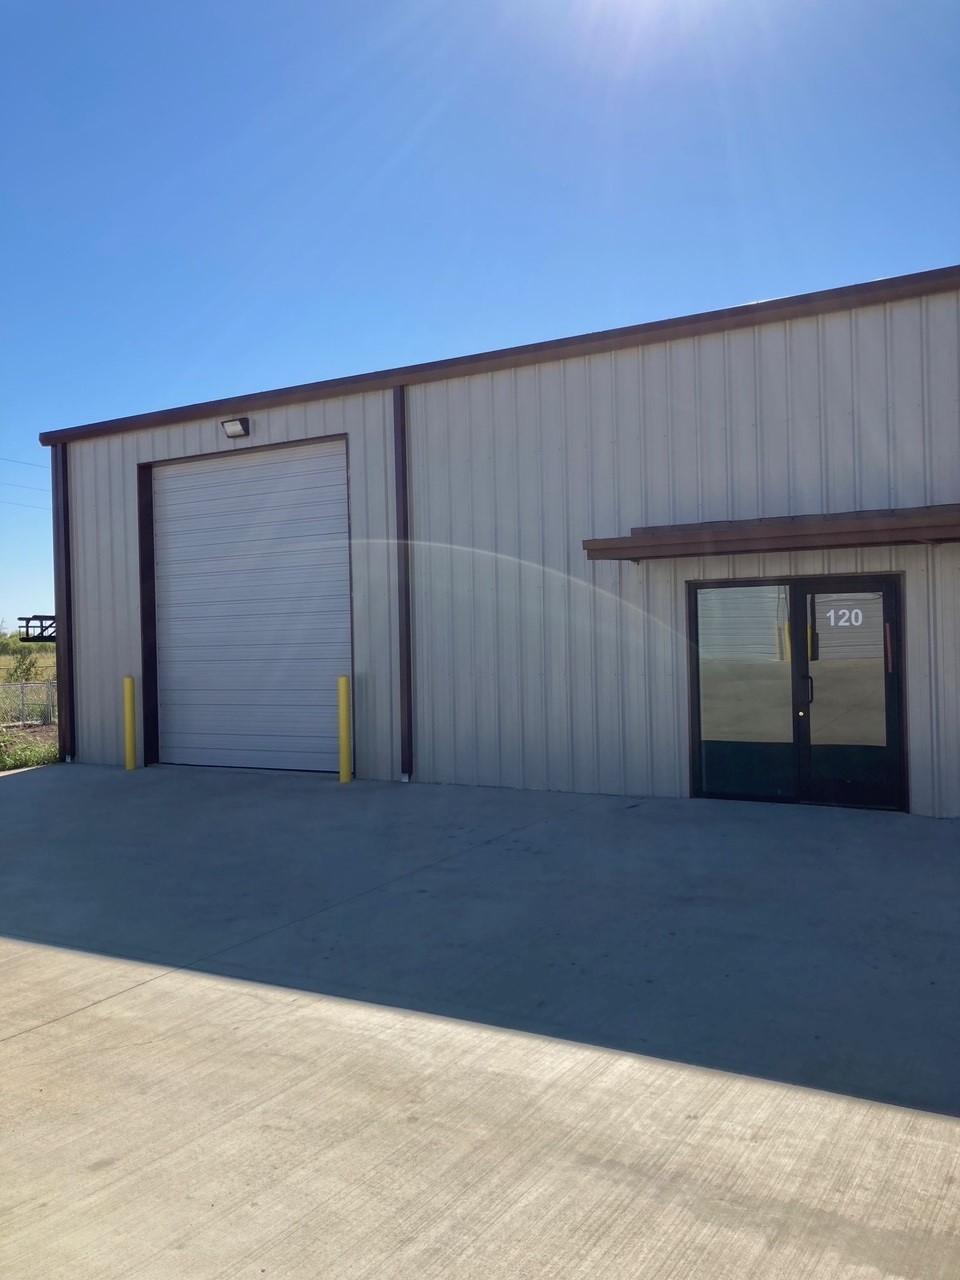 Johnson Countr office warehouse for rent